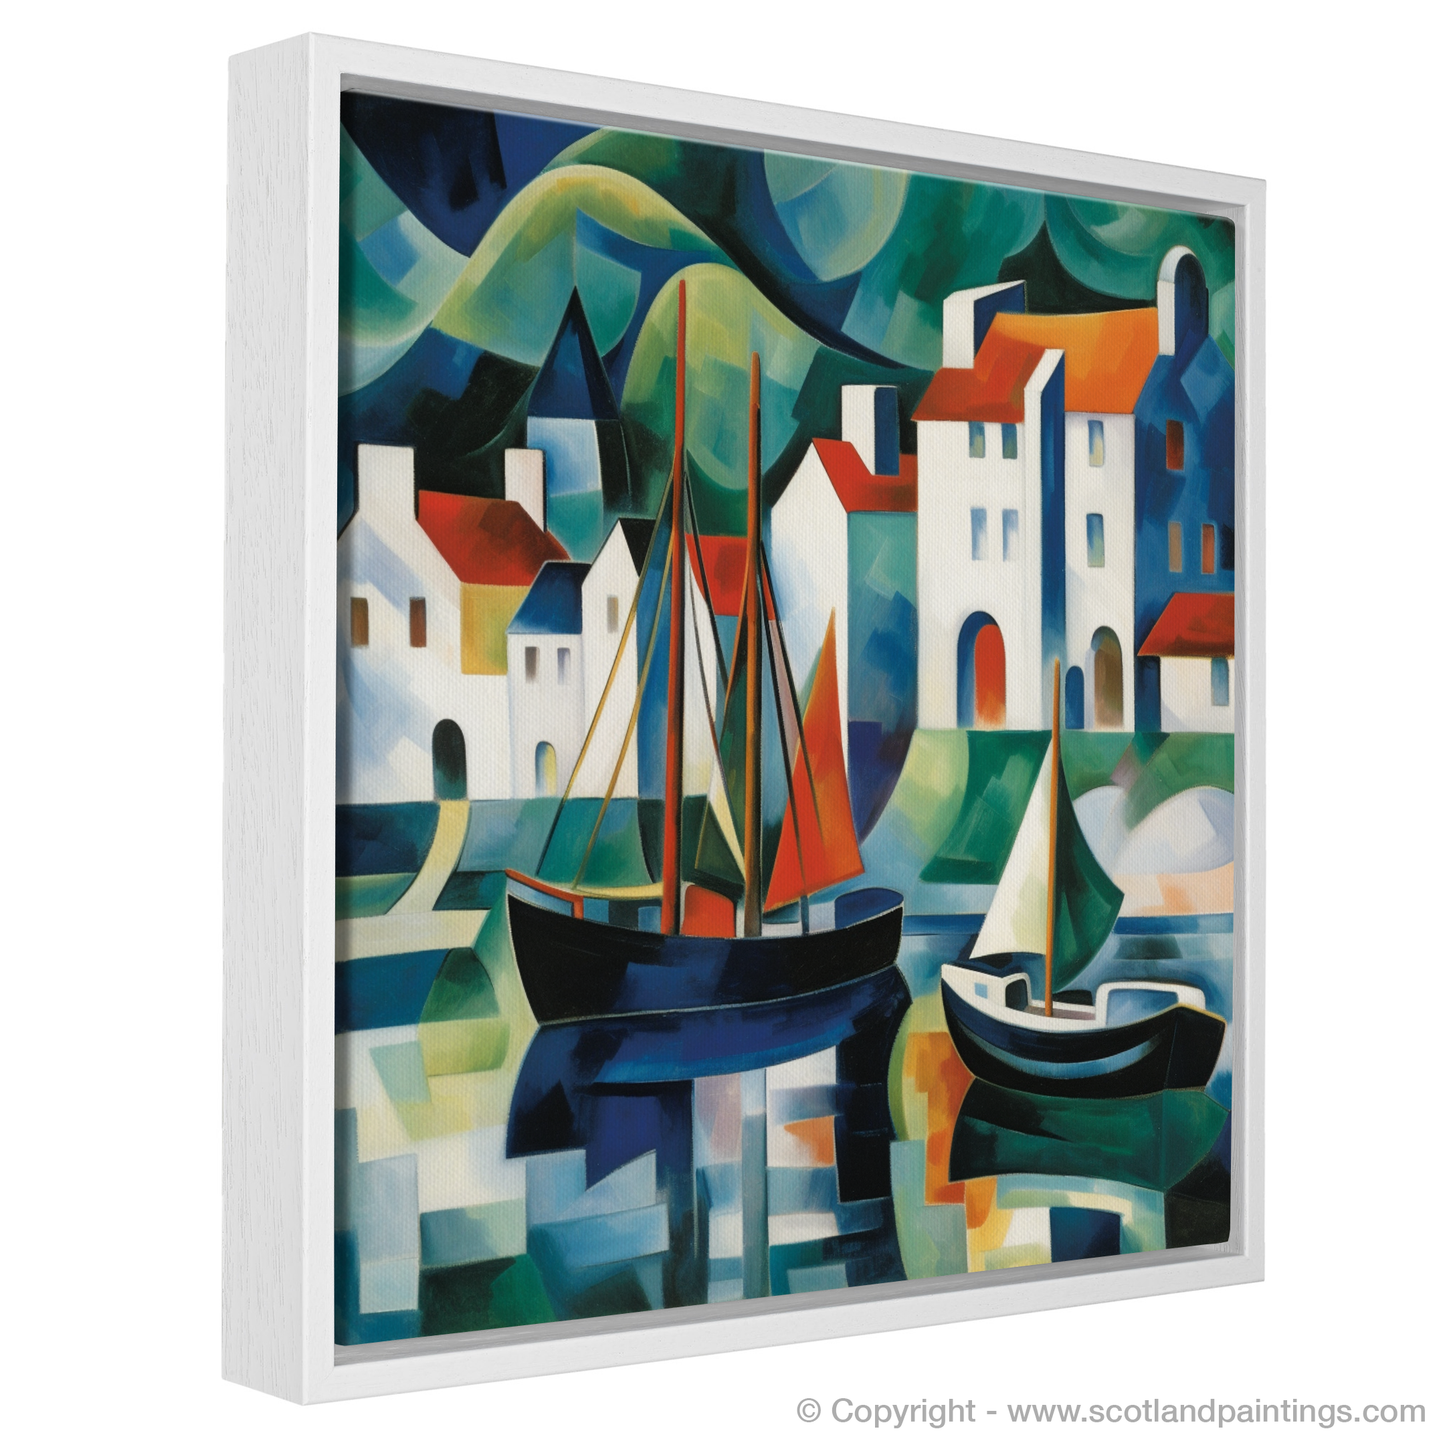 Cubist Serenity of Portree Harbour